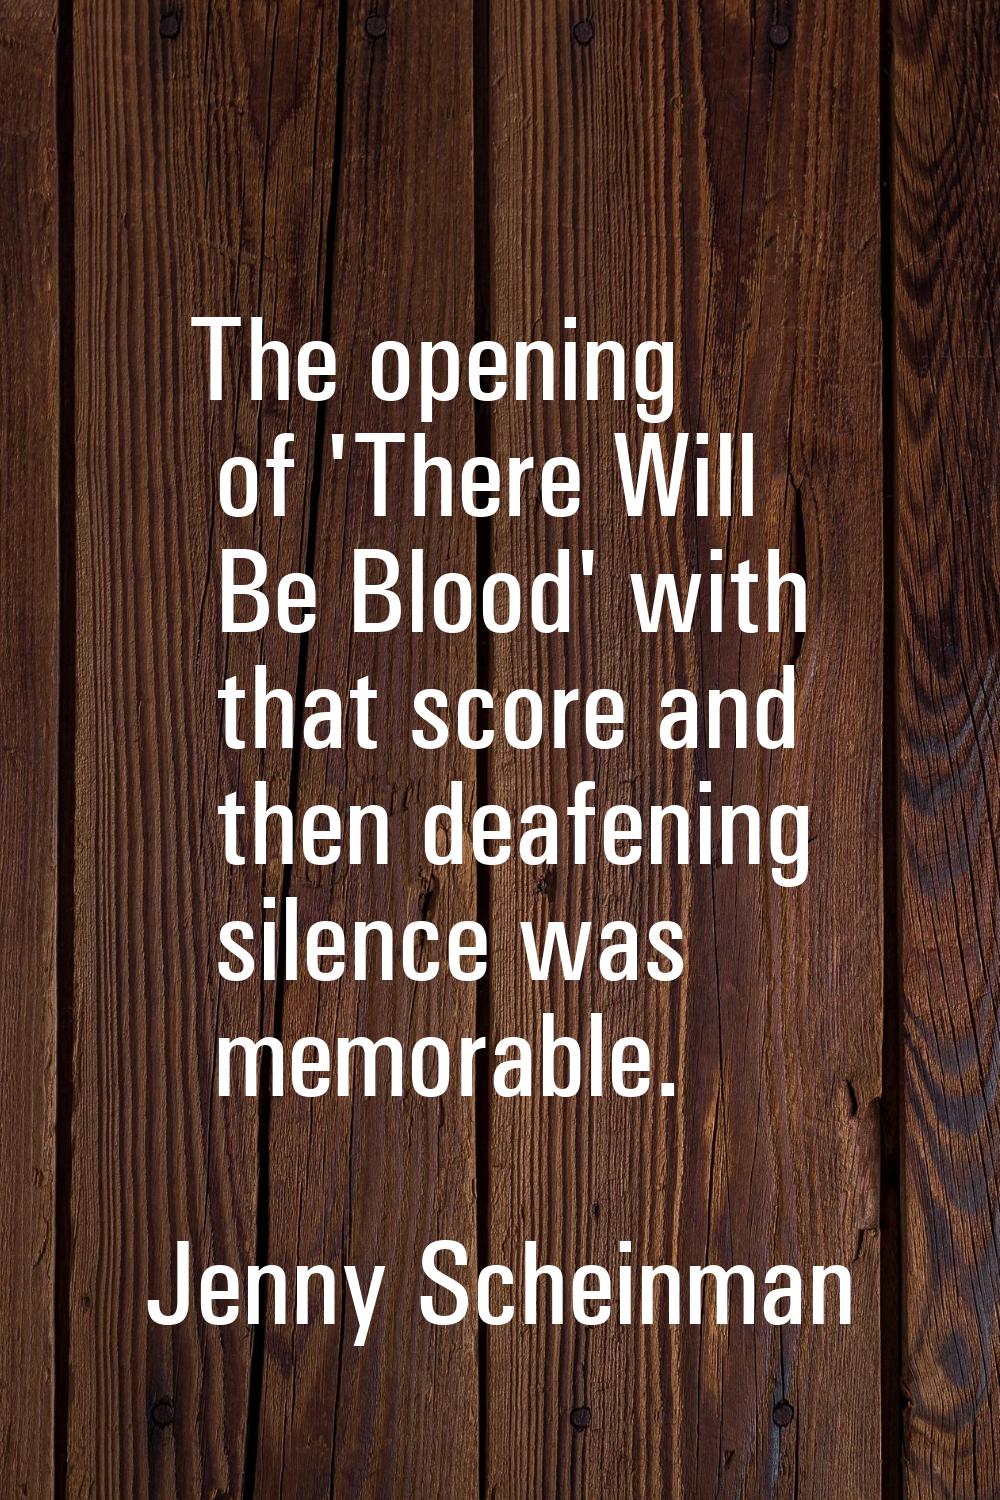 The opening of 'There Will Be Blood' with that score and then deafening silence was memorable.